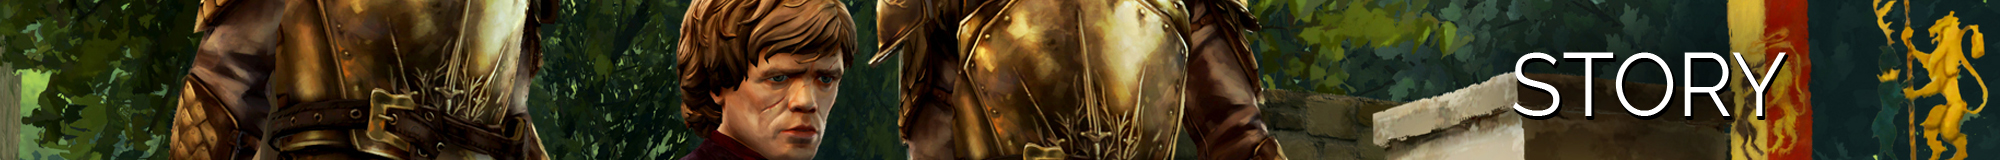 BANNER_STORY